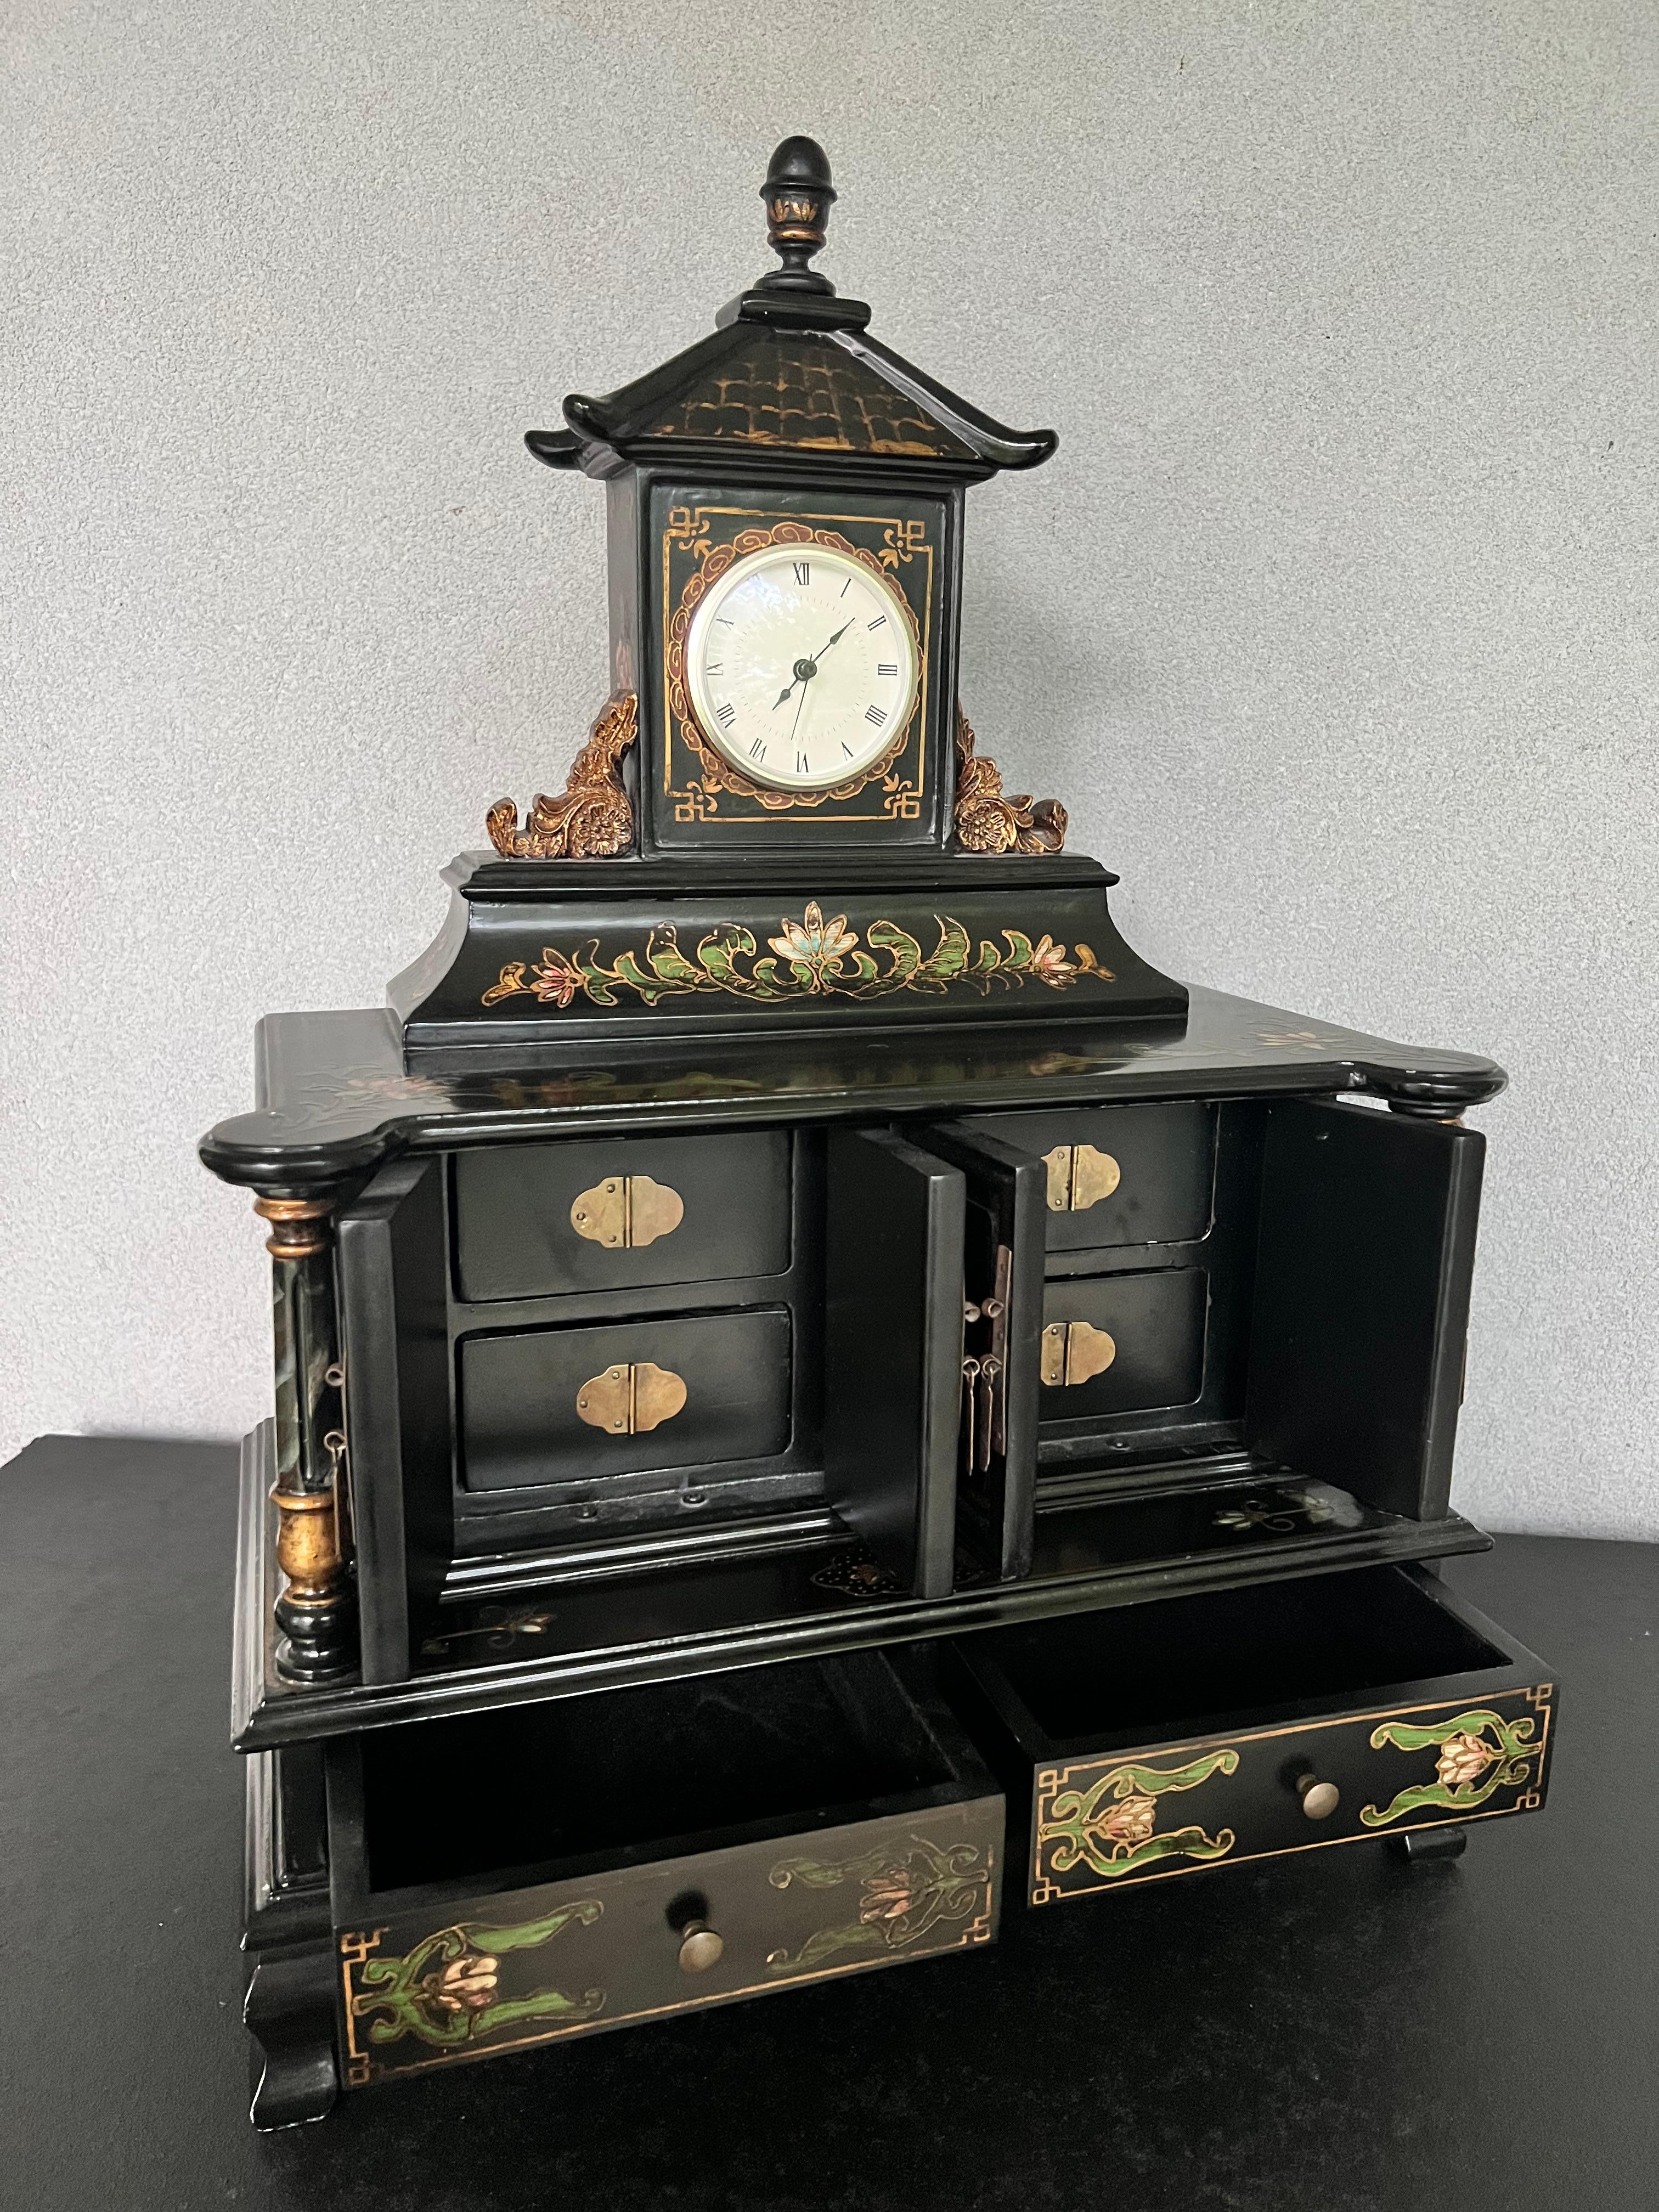 Chinese Mid-20th Century Black Lacquer Pagoda Jewelry Box With Clock  For Sale